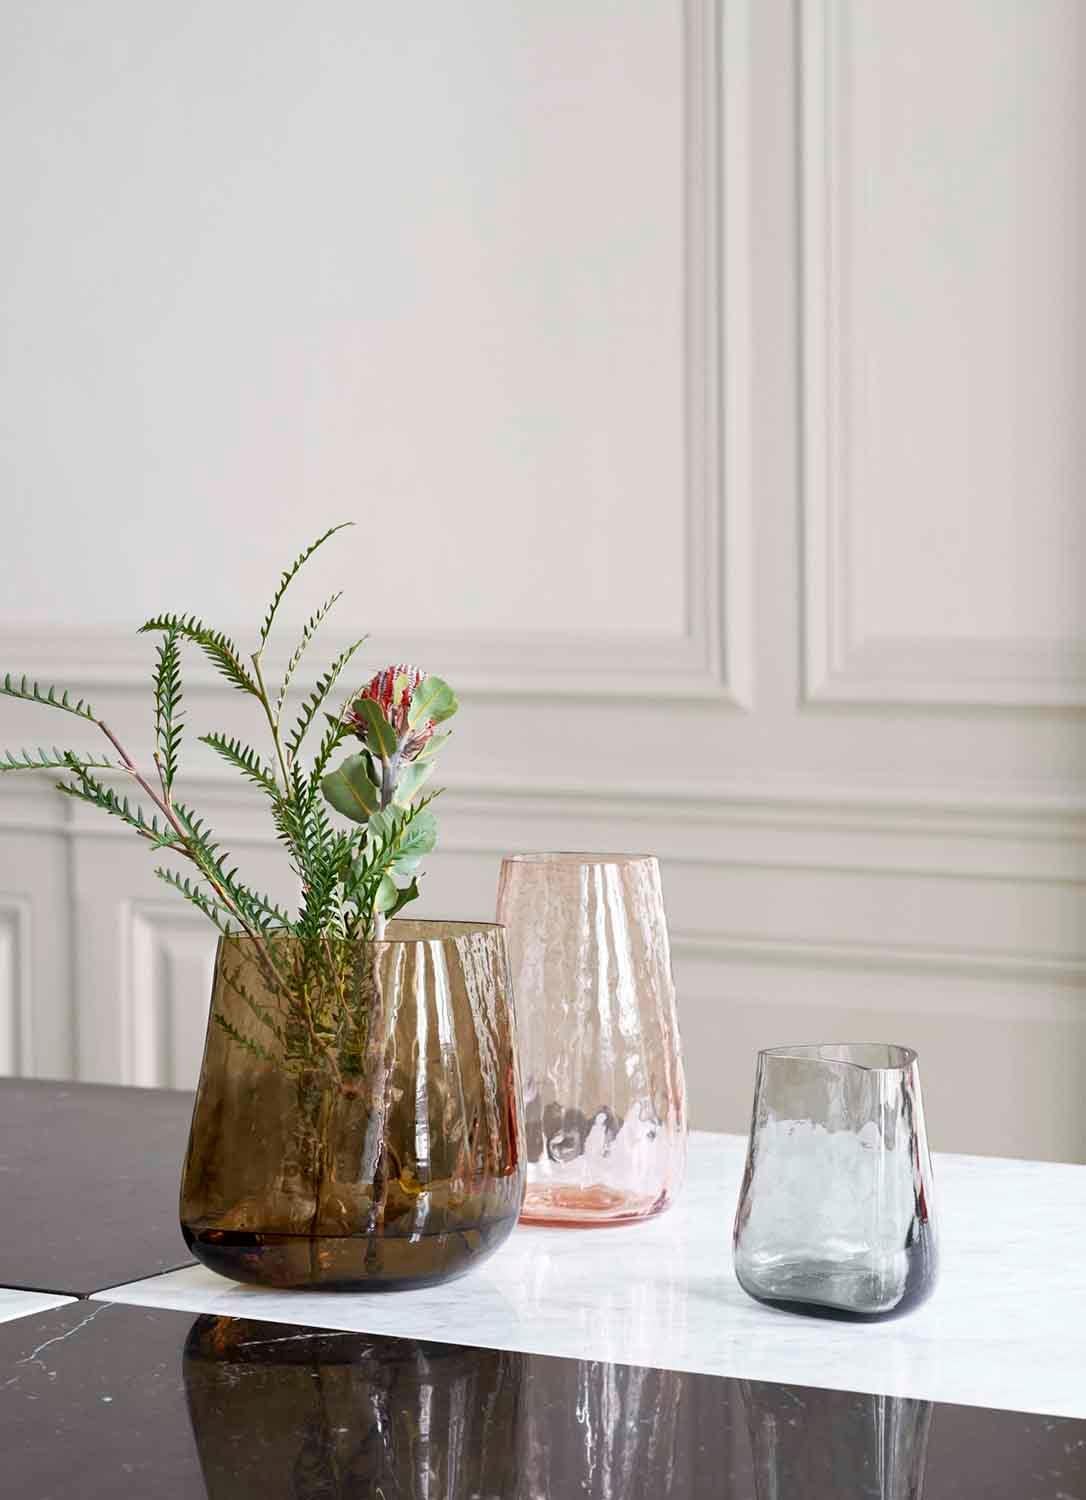 Crafted from glass, this vase play with the material’s transparency to create a rippled, liquid-like effect. 
It is part of Collect series, a curated line of beautifully crafted soft furnishings and home objects designed by Space Copenhagen. 
This